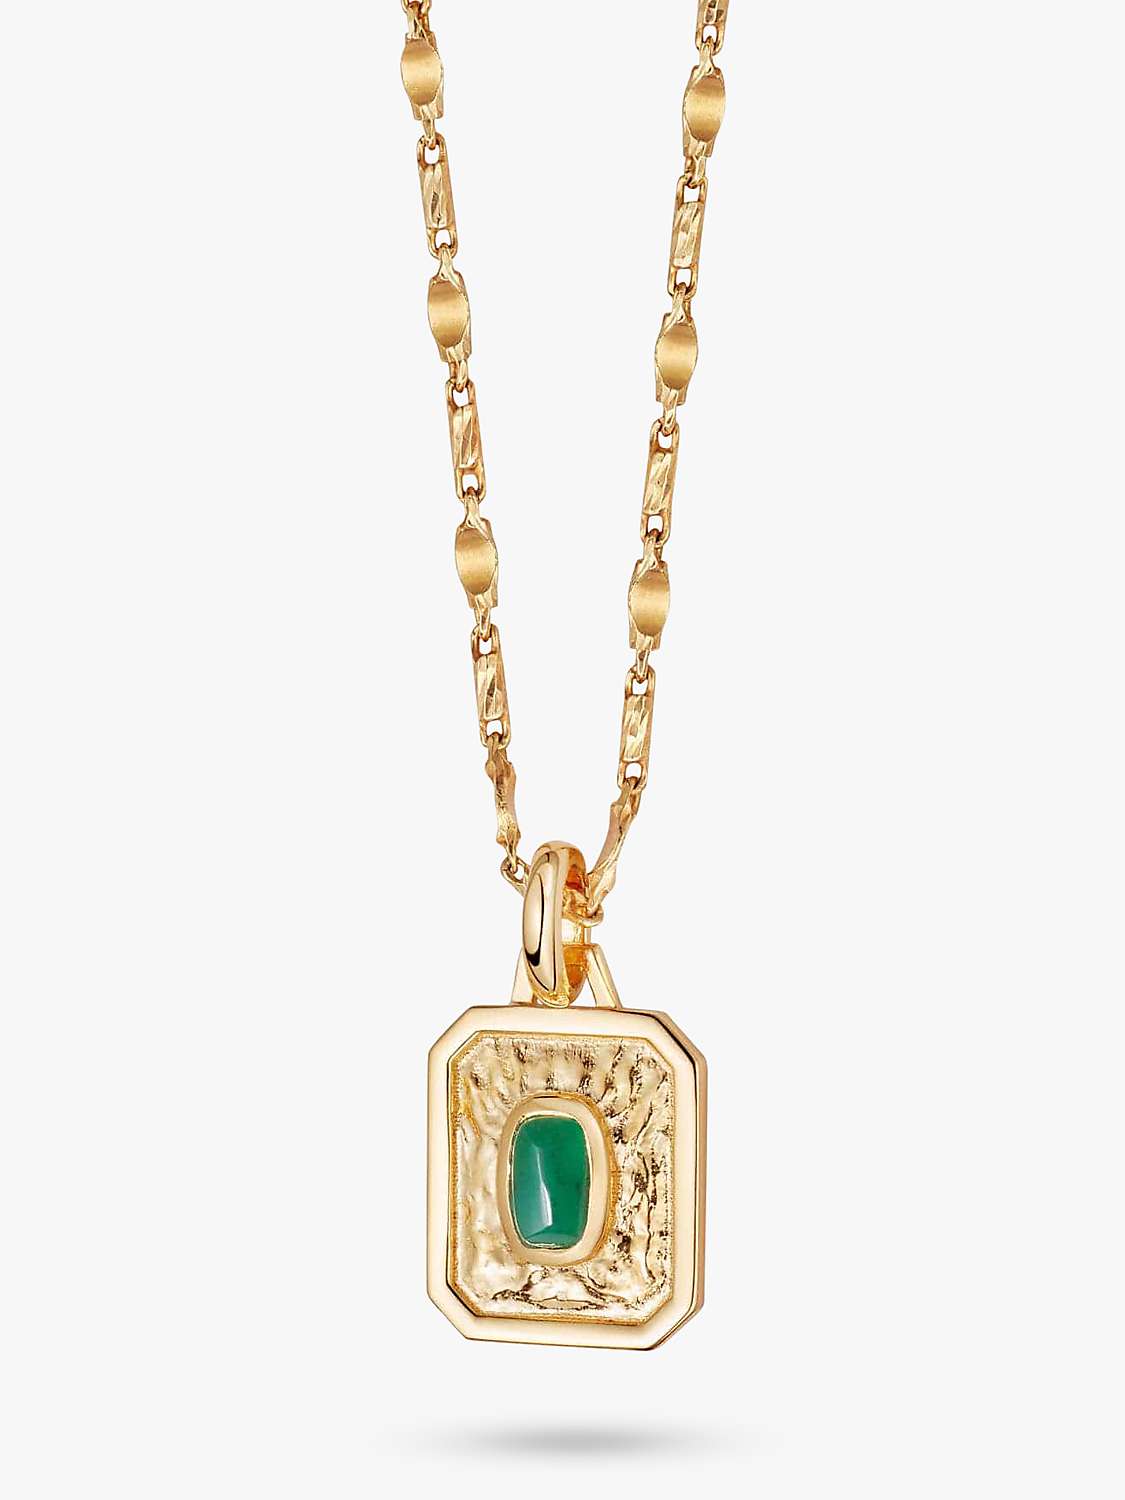 Buy Daisy London Birthstone Pendant Necklace, Gold/Emerald Online at johnlewis.com